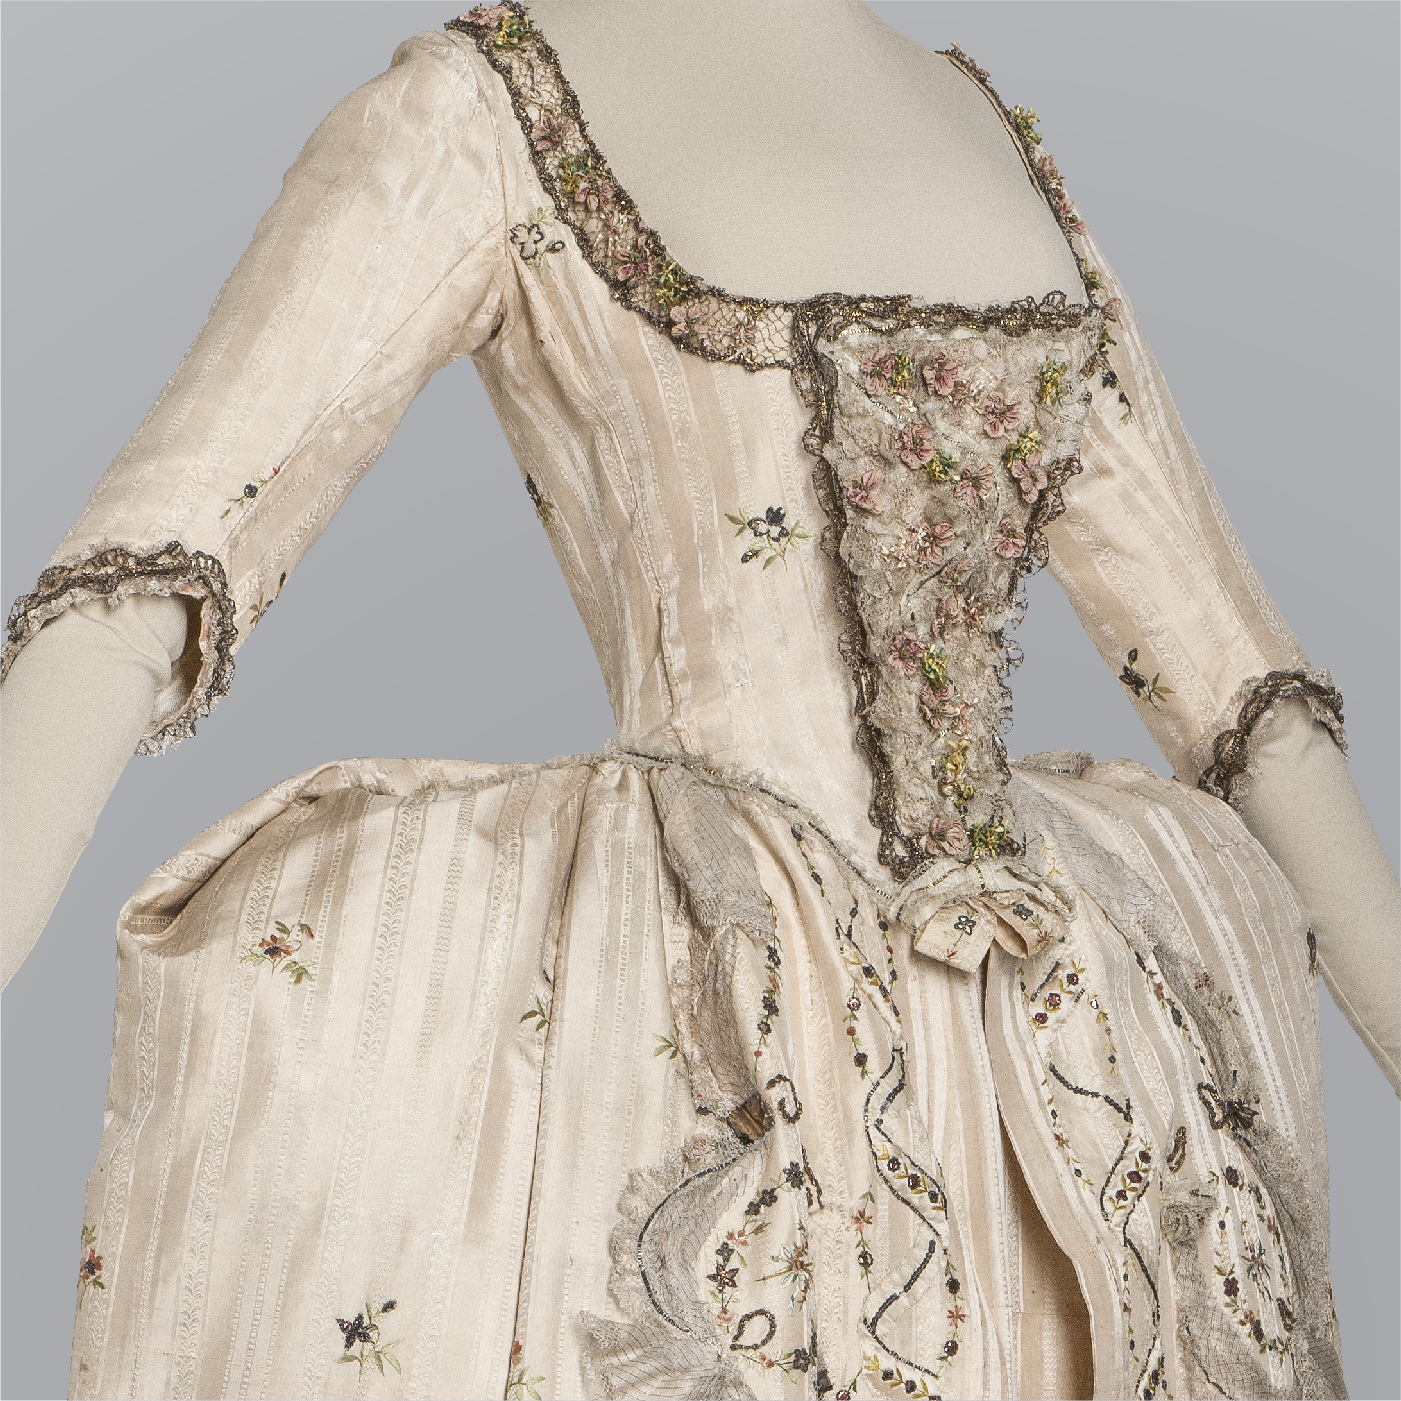 Court dress (mantle, skirt, and stomacher)